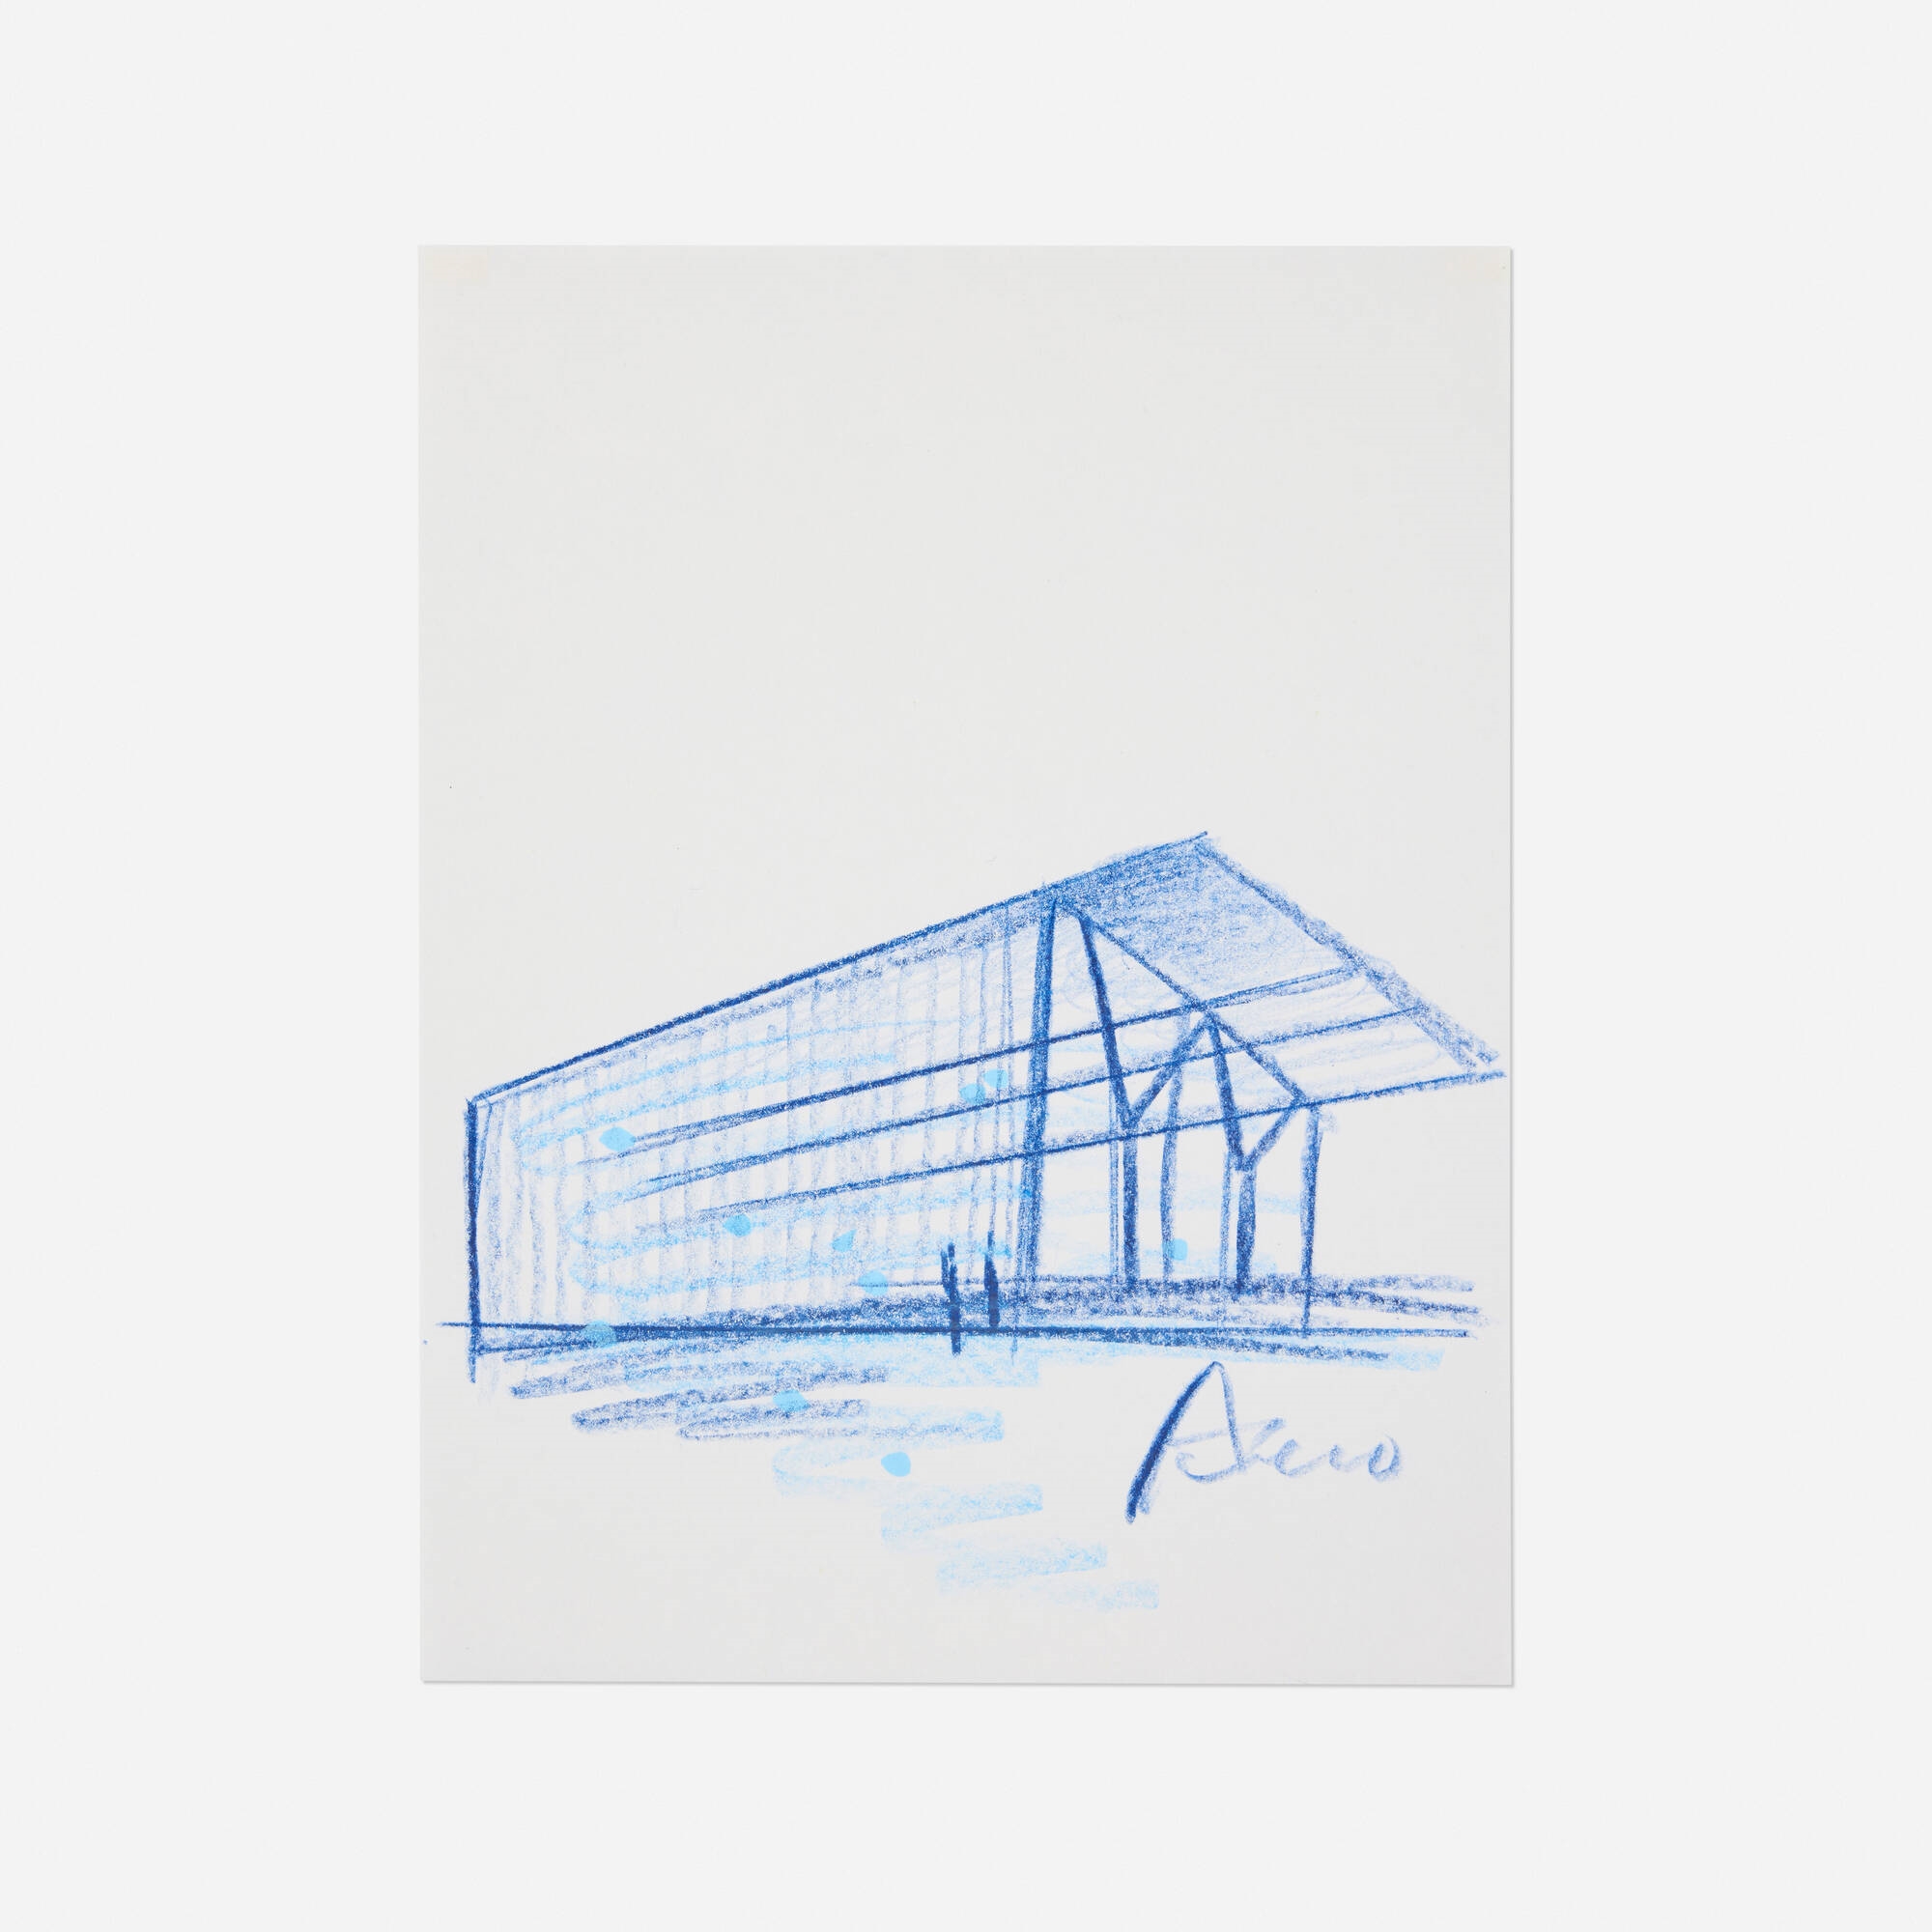 Architectural sketch (The Modern Art Museum of Fort Worth - Tadao Ando